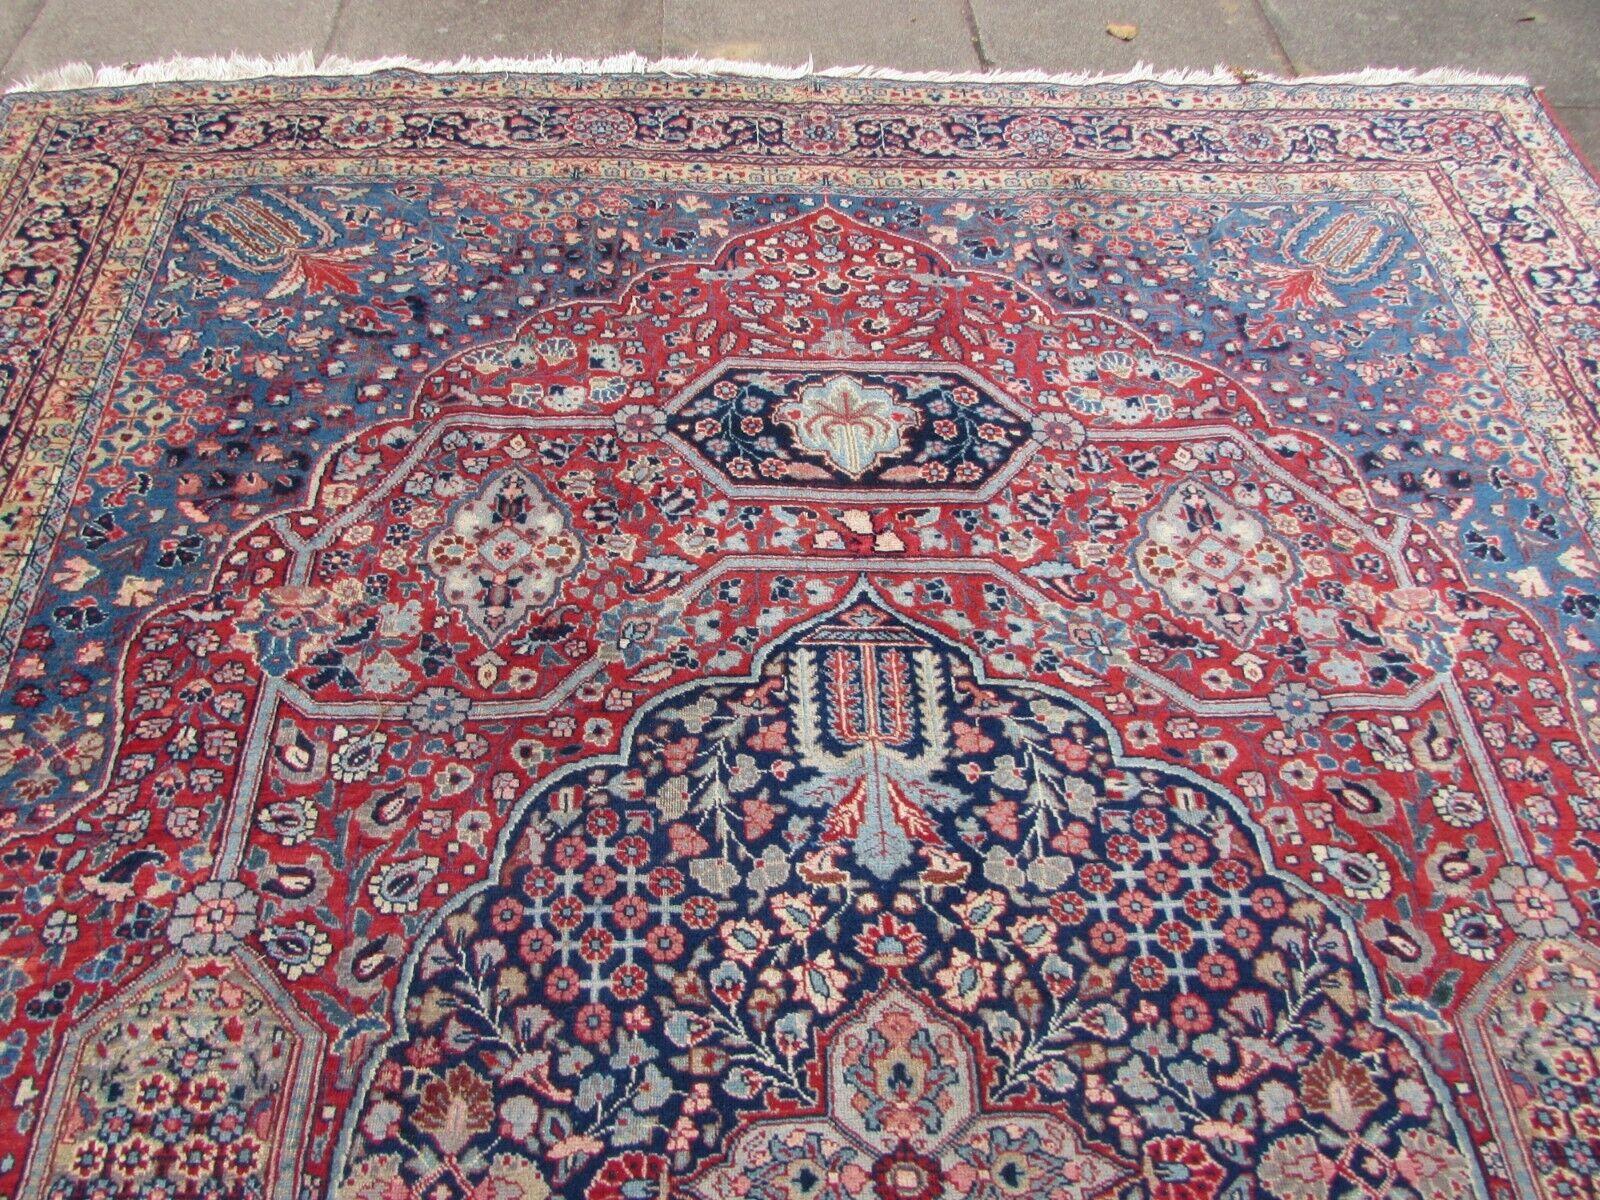 Handmade Vintage Persian Style Kazvin Rug 9.3' x 12.3', 1970s - 1Q68 For Sale 5